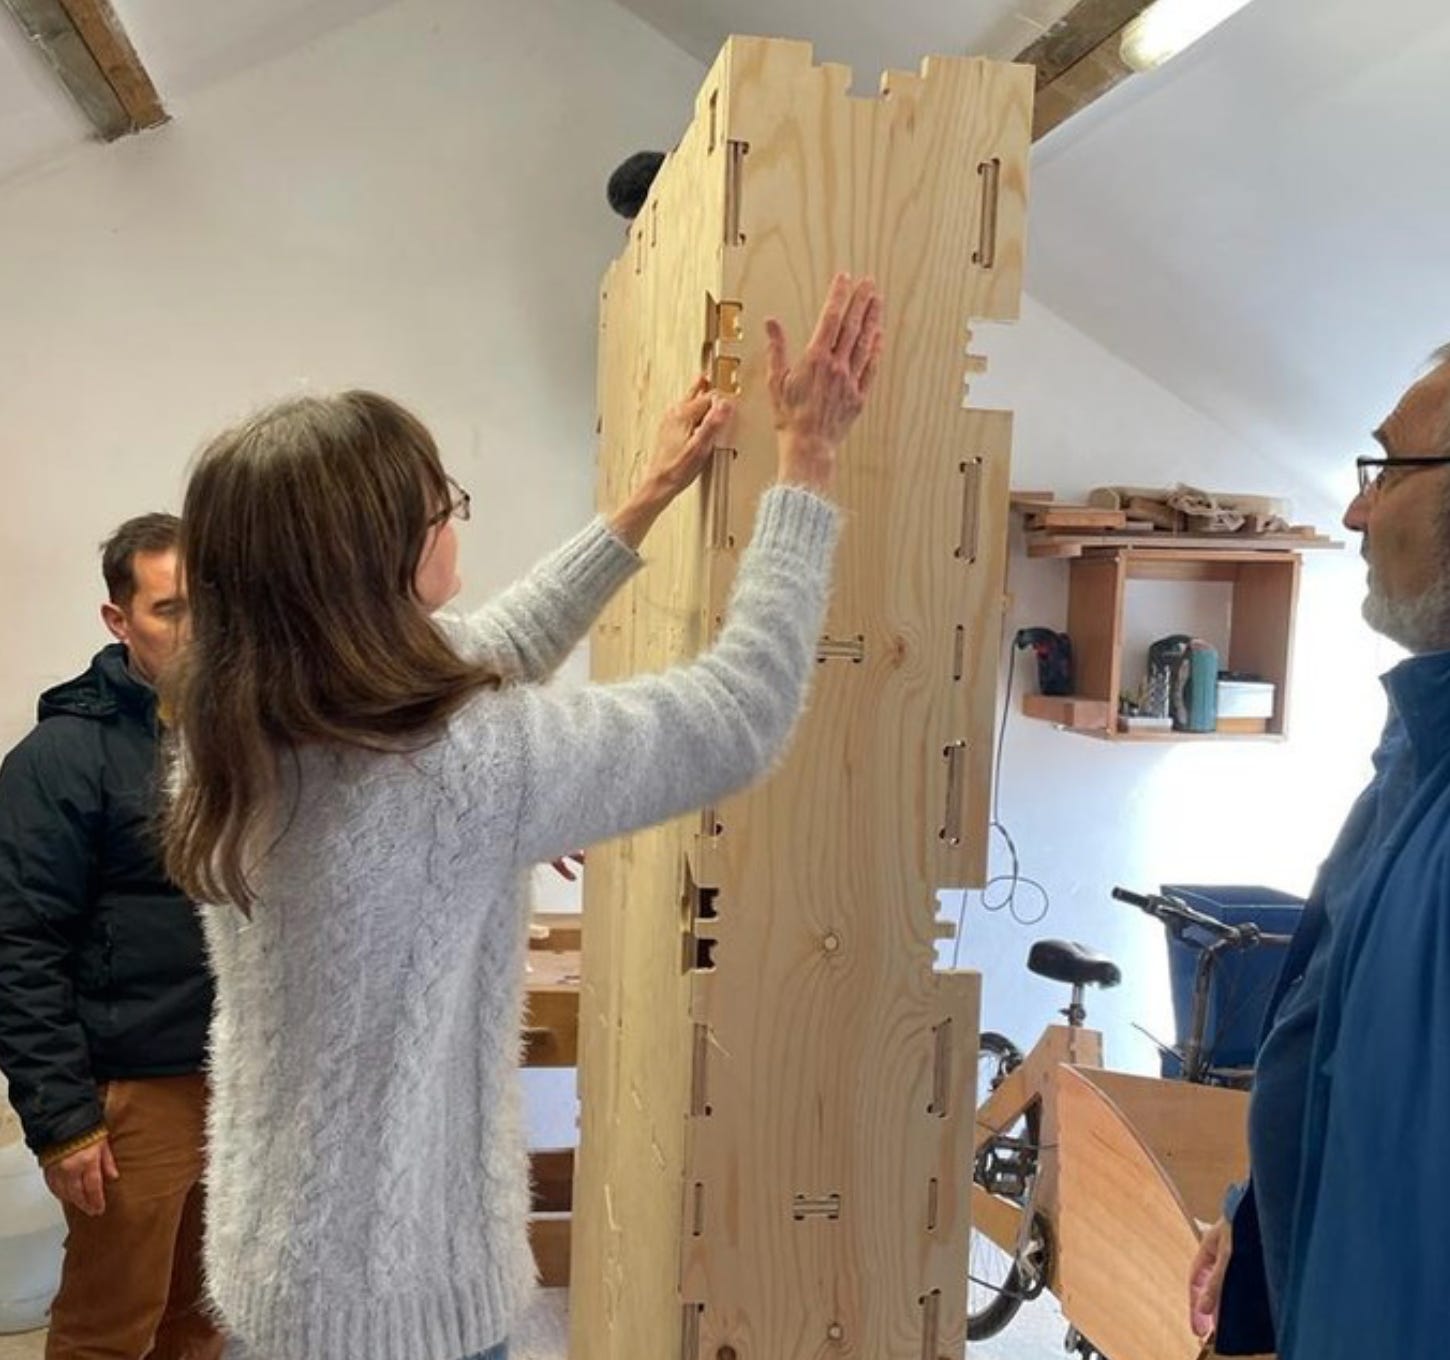 3 people can be seen building a WikiHouse block made from plywood